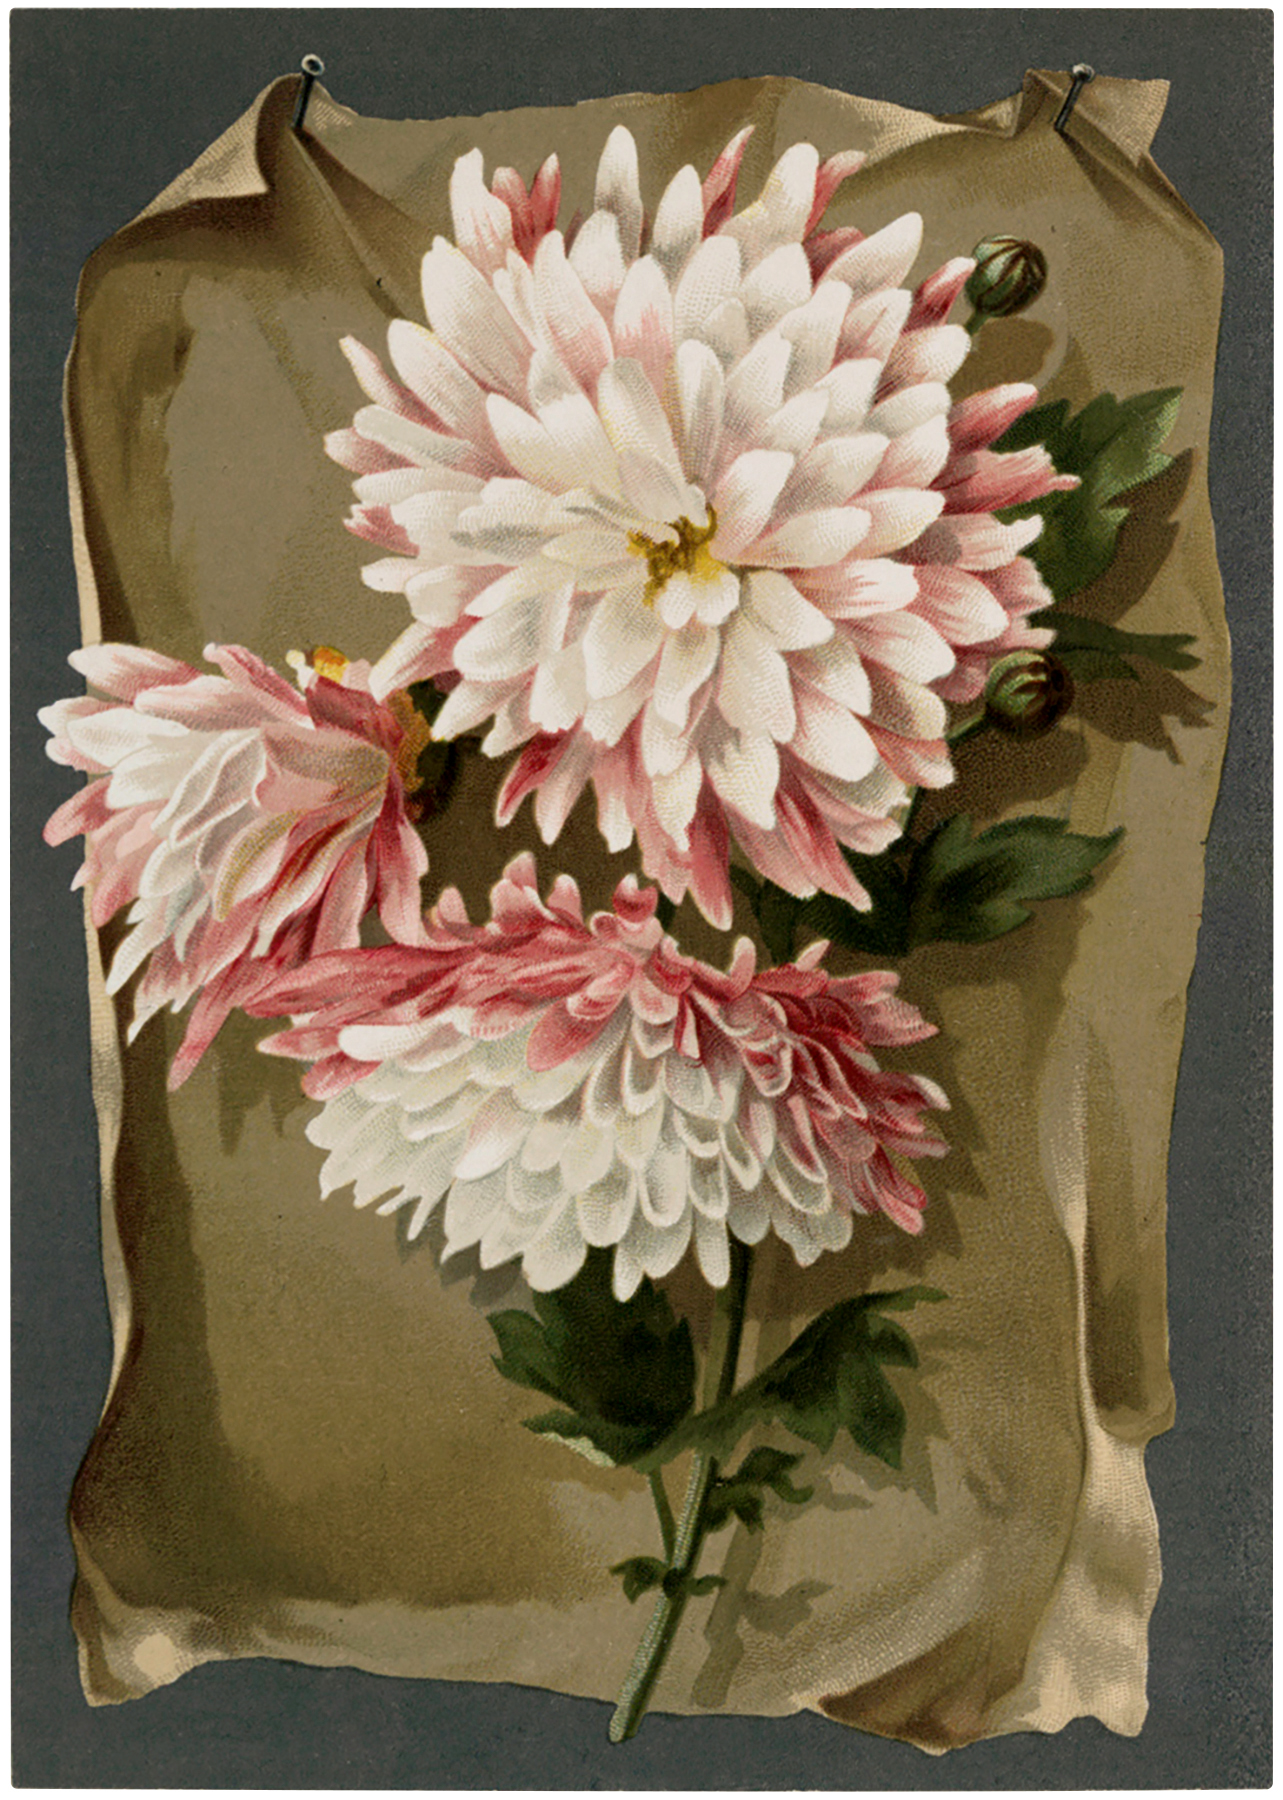 Vintage Pink Mums Image! - The Graphics Fairy1283 x 1800